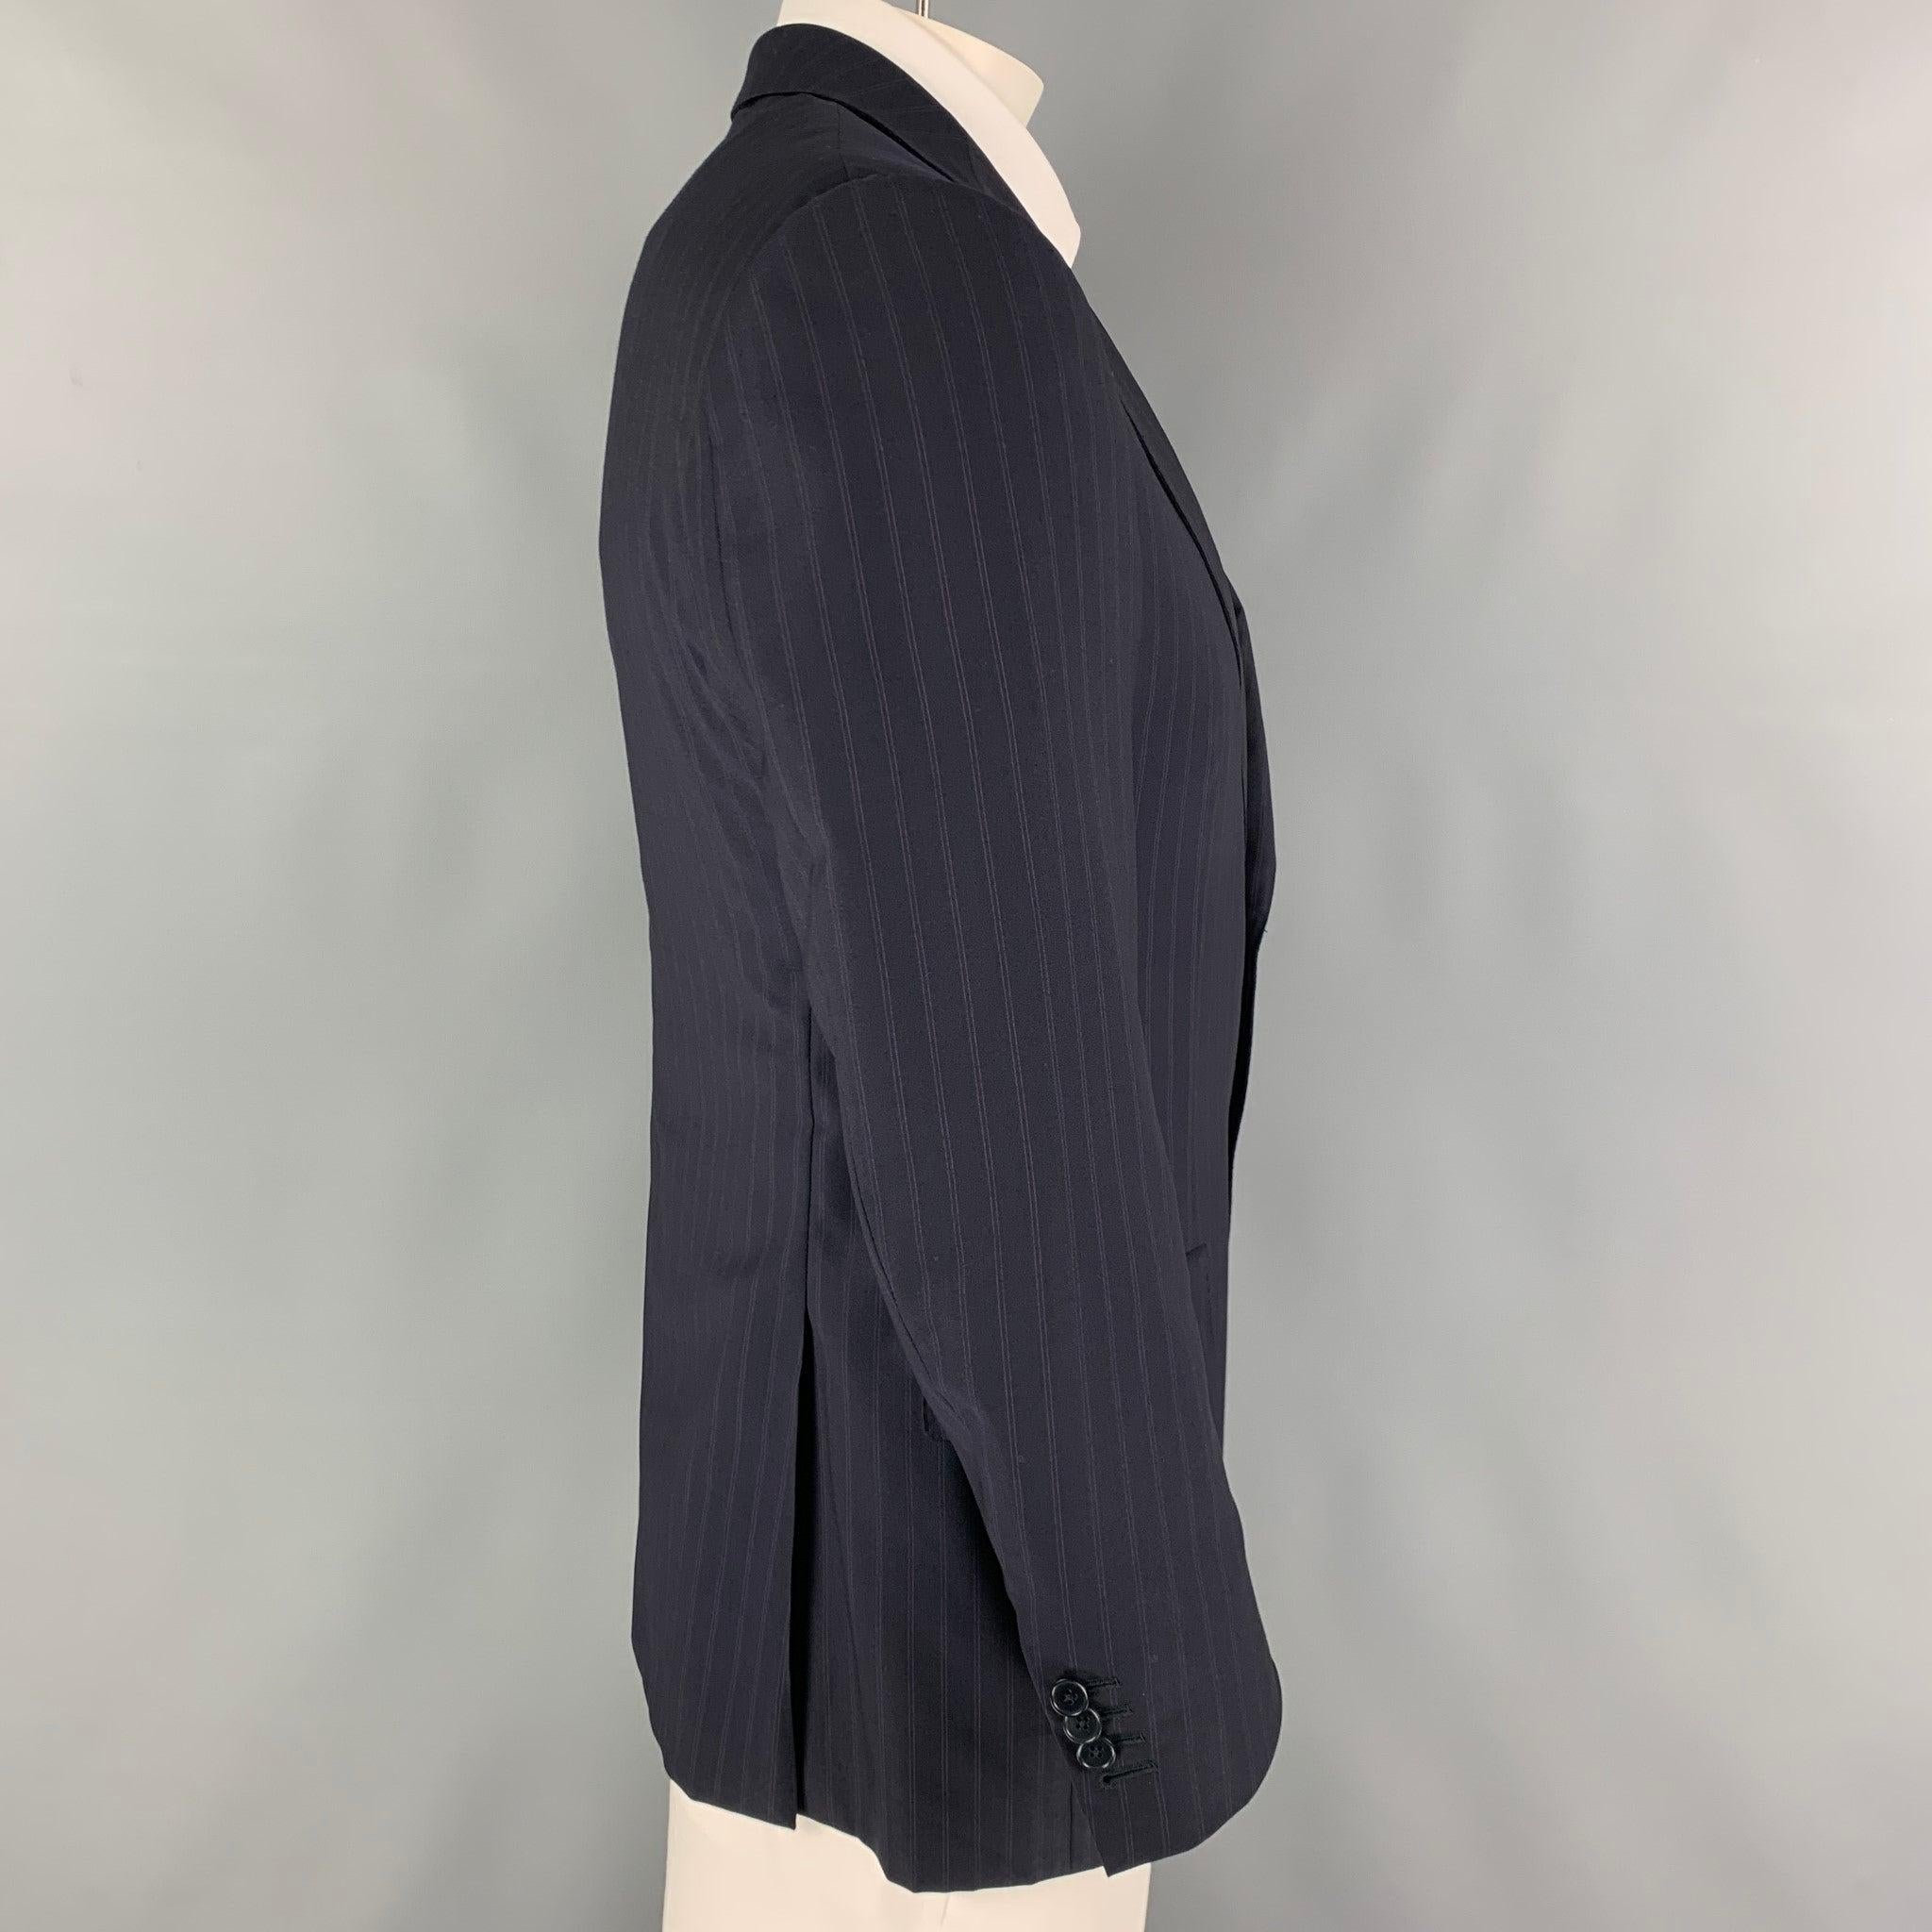 ERMENEGILDO ZEGNA sport coat comes in a black & purple stripe wool / silk with a full liner featuring a notch lapel, flap pockets, double back vent, and a double button closure.
Excellent
Pre-Owned Condition. 

Marked:   52 C  

Measurements: 
